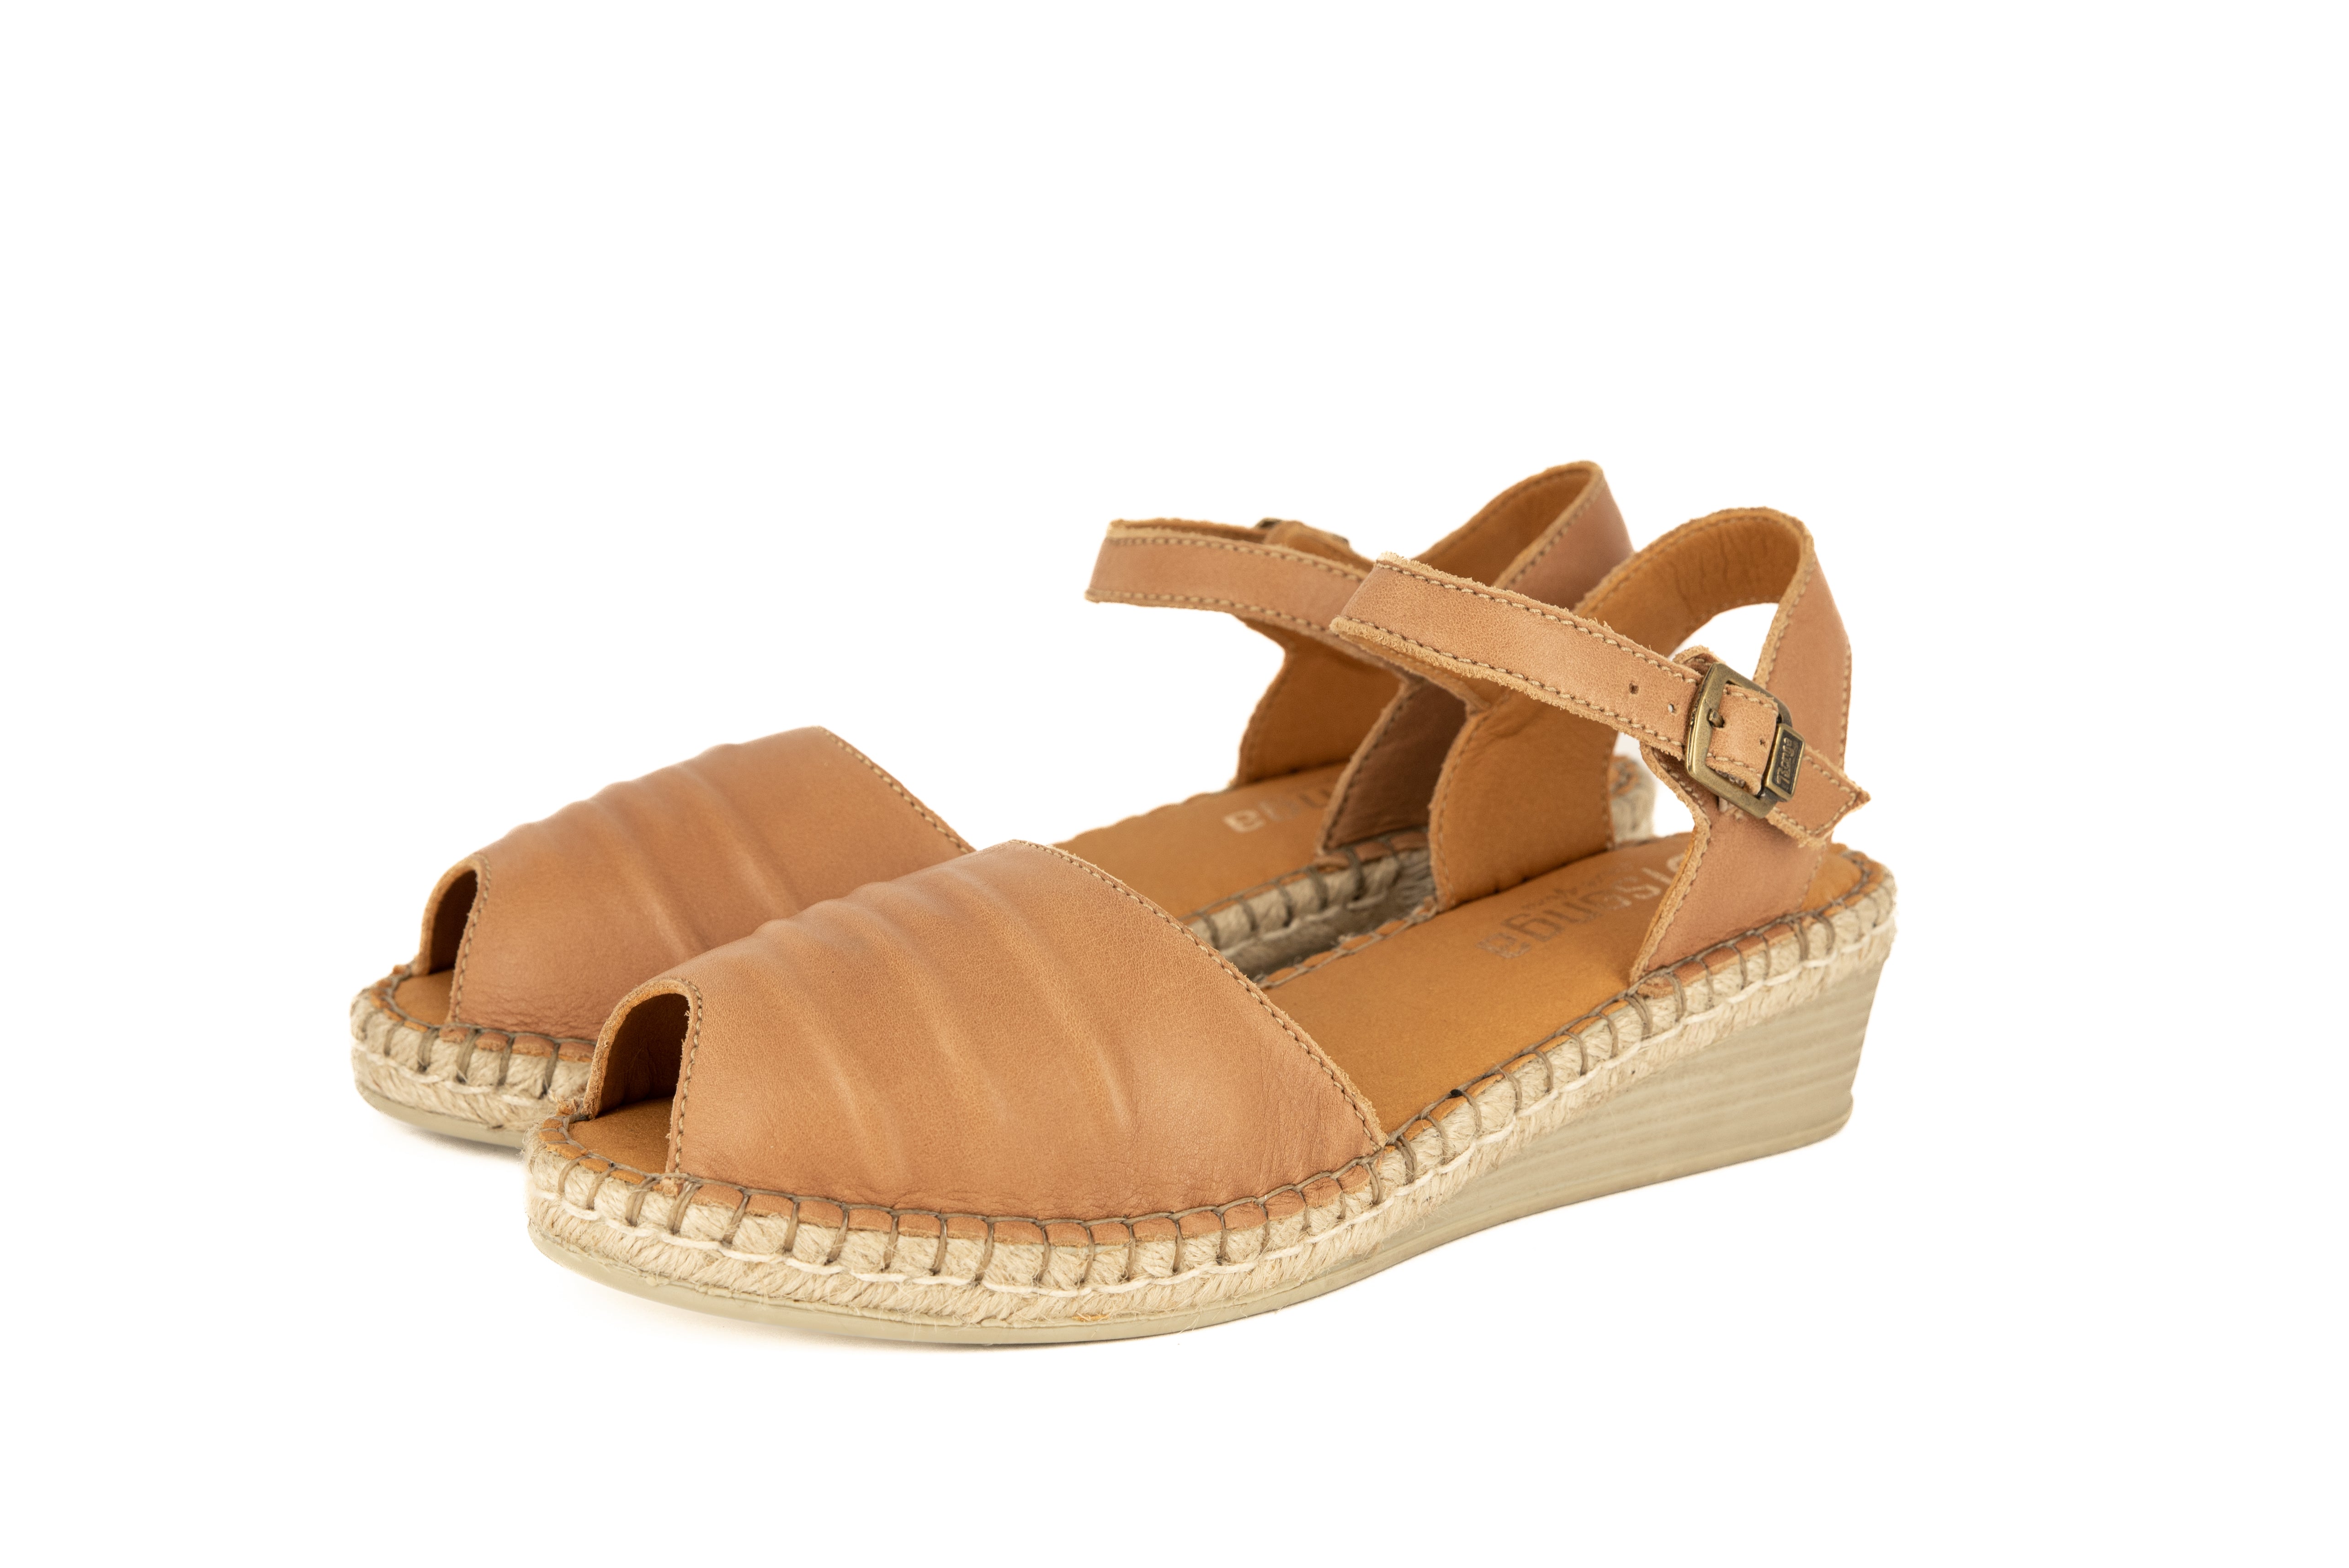 Wedges  Buy Wedge Shoes Online Australia - THE ICONIC